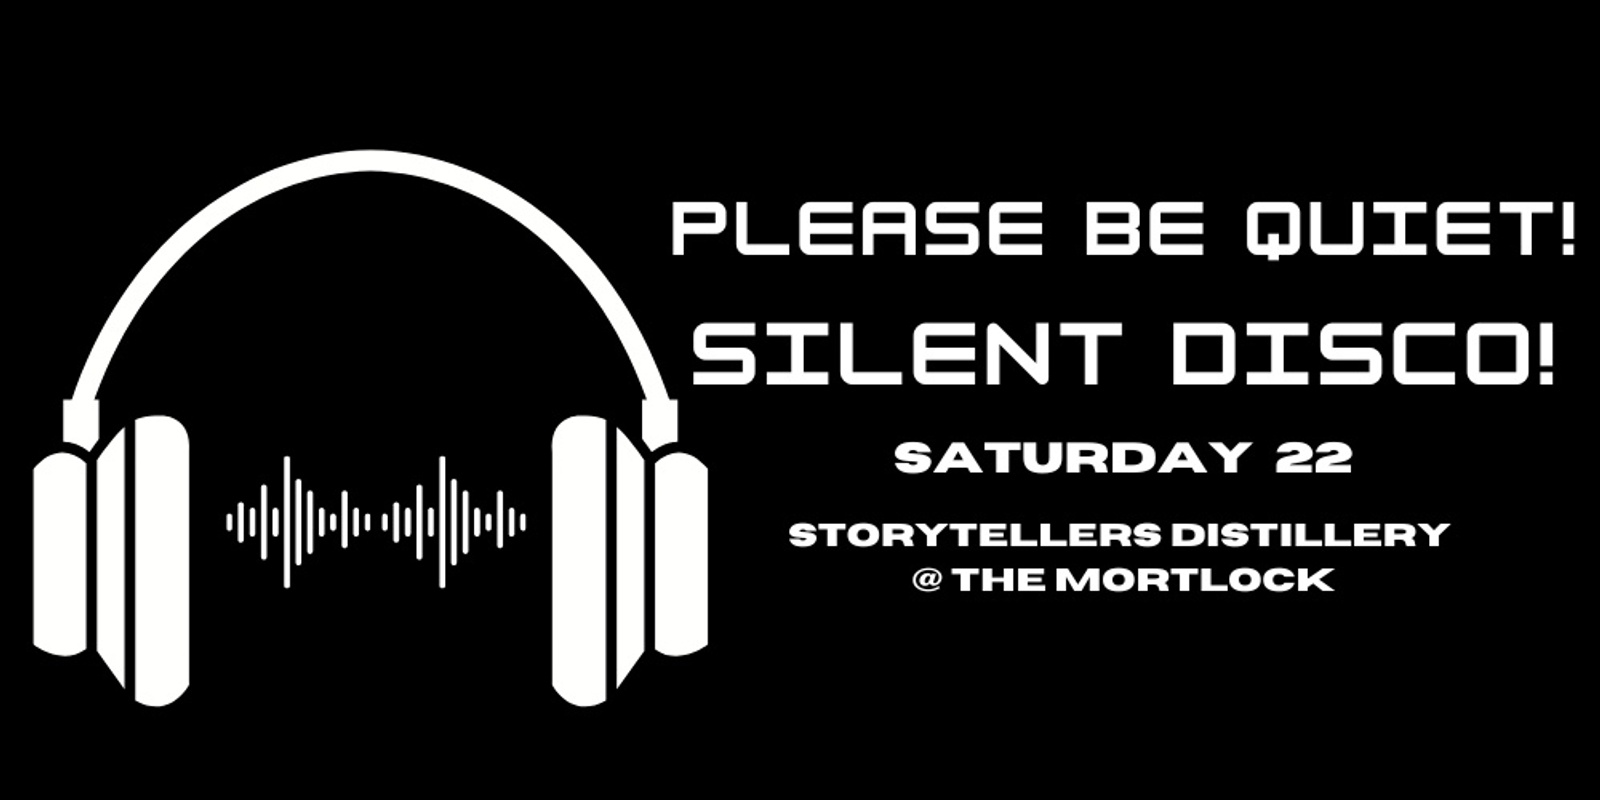 Banner image for Please Be Quiet! Silent Disco! @ The Mortlock